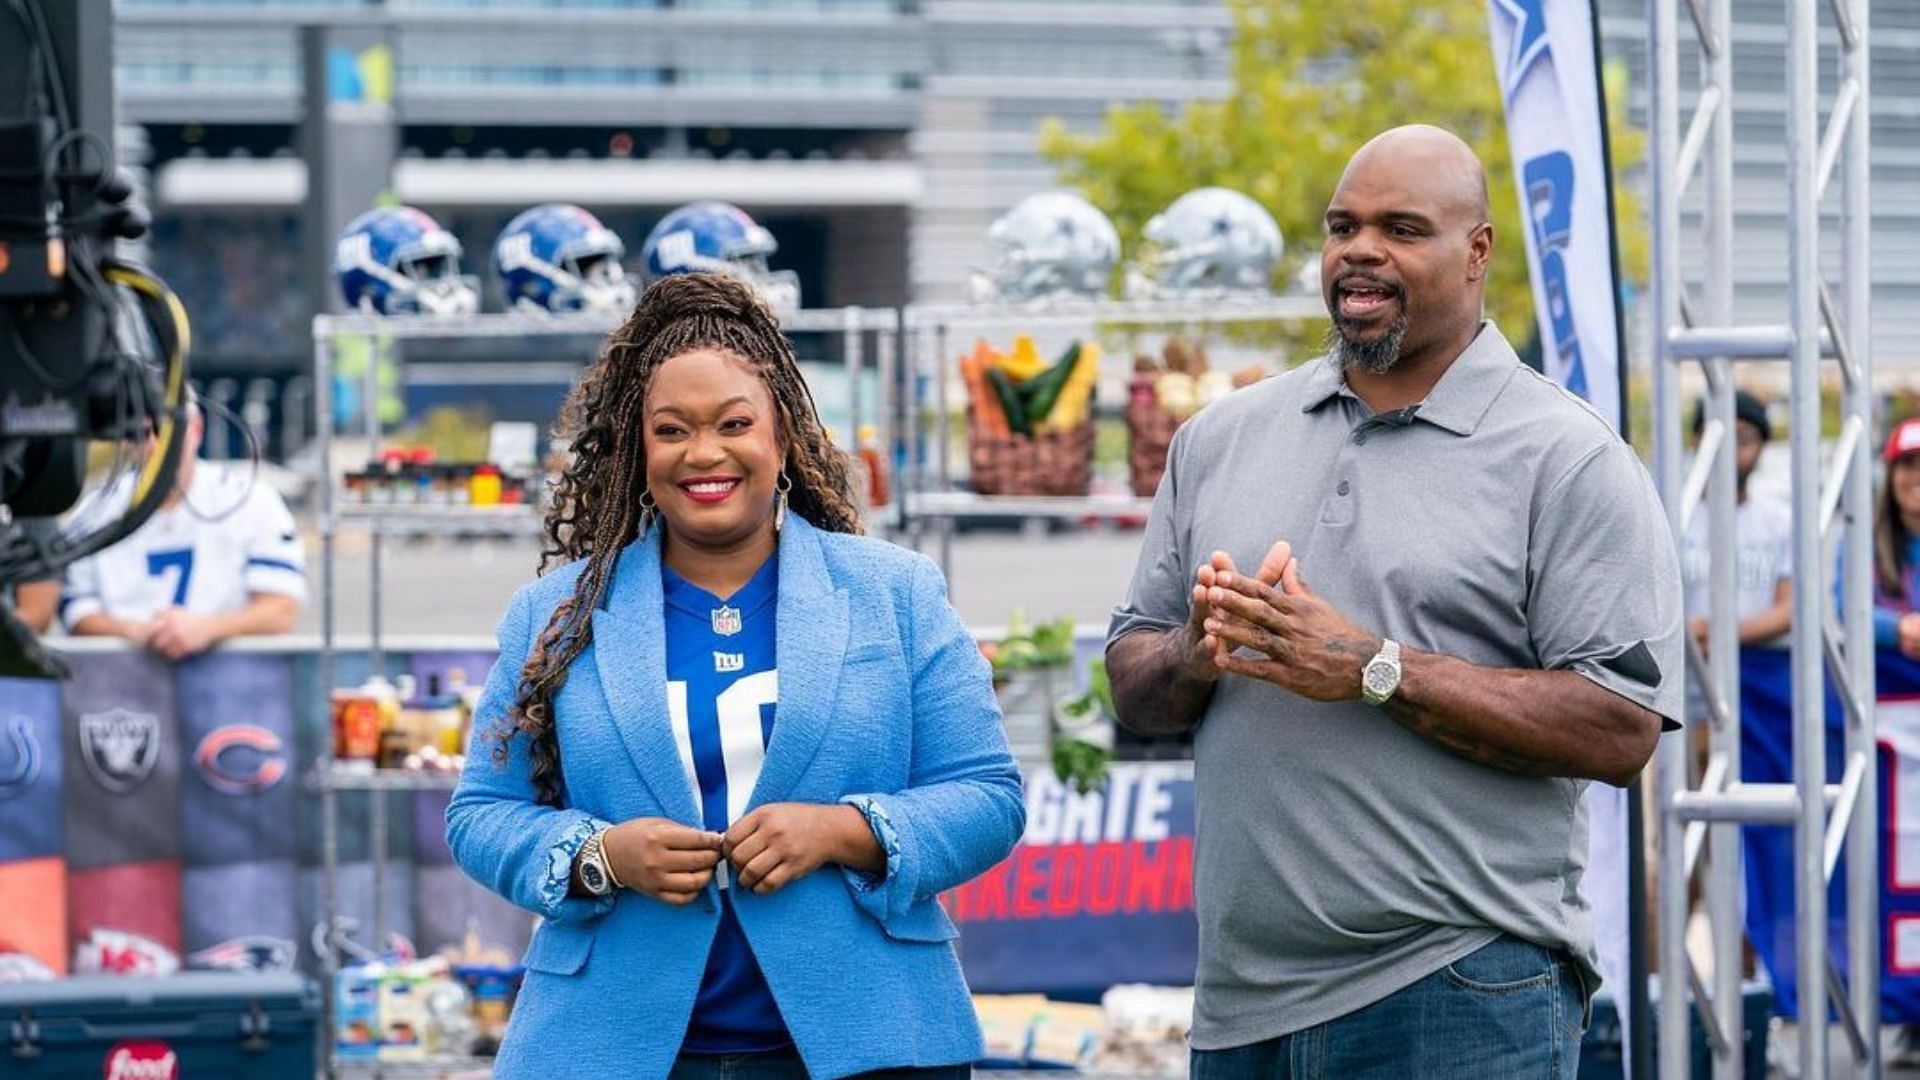 NFL Tailgate Takedown premieres on January 4, at 9 pm ET